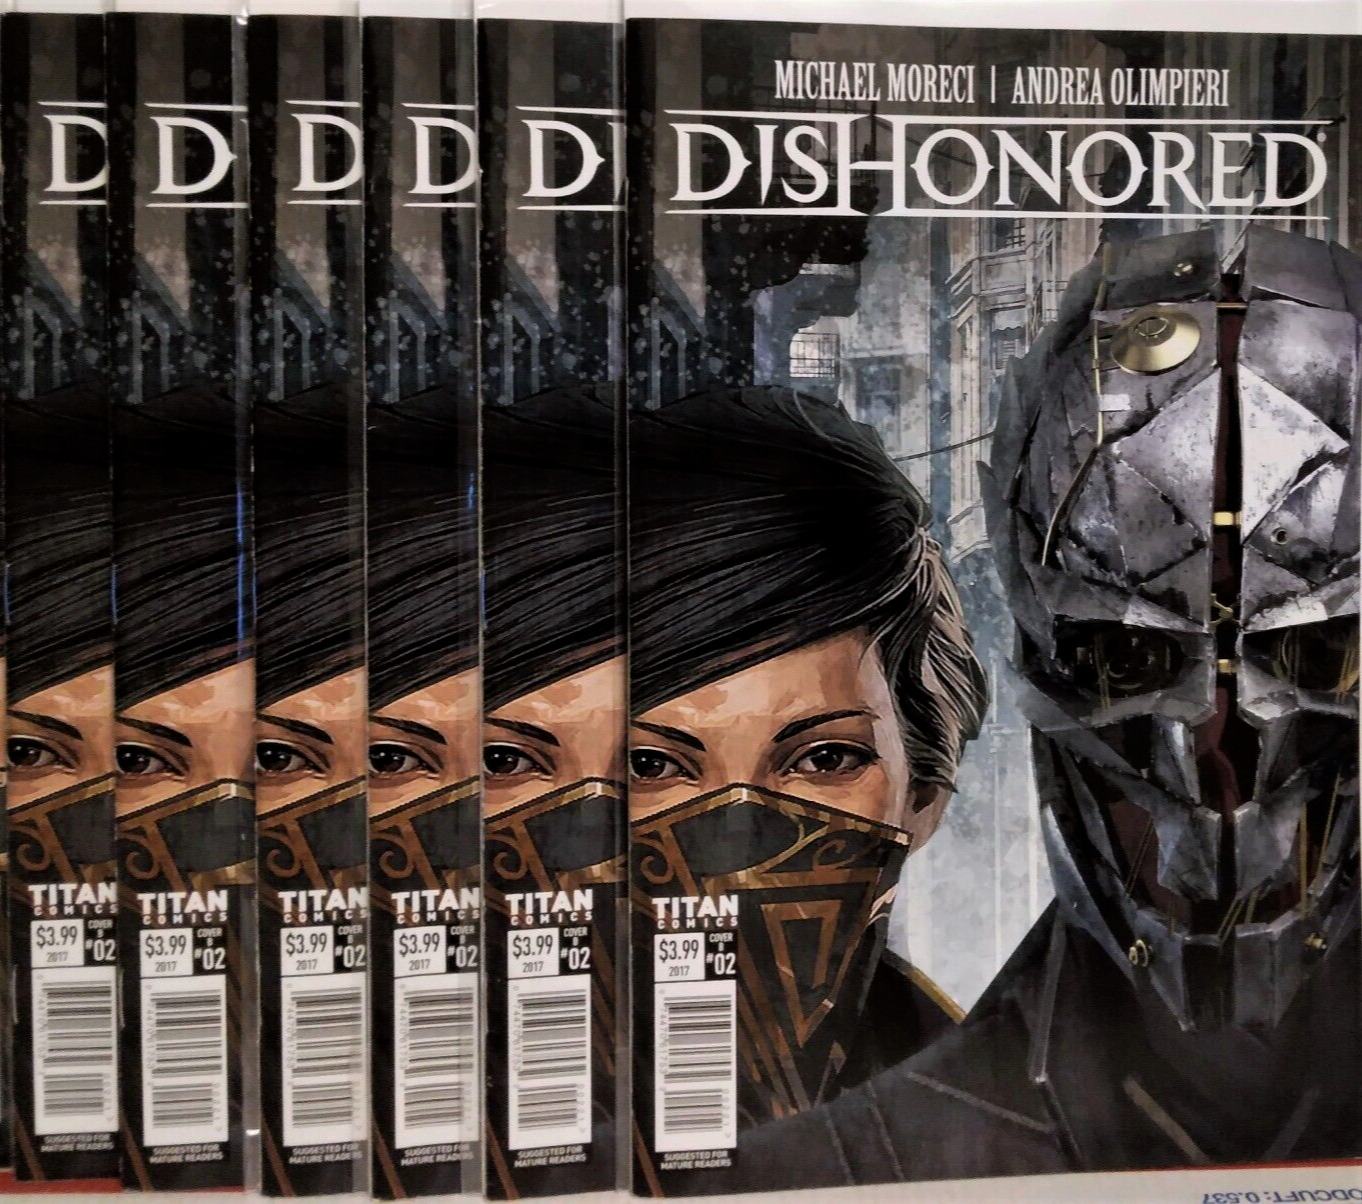 💥 6x COPIES DISHONORED #2 GAME ART VARIANT Michael Moreci PEERESS AND THE PRICE